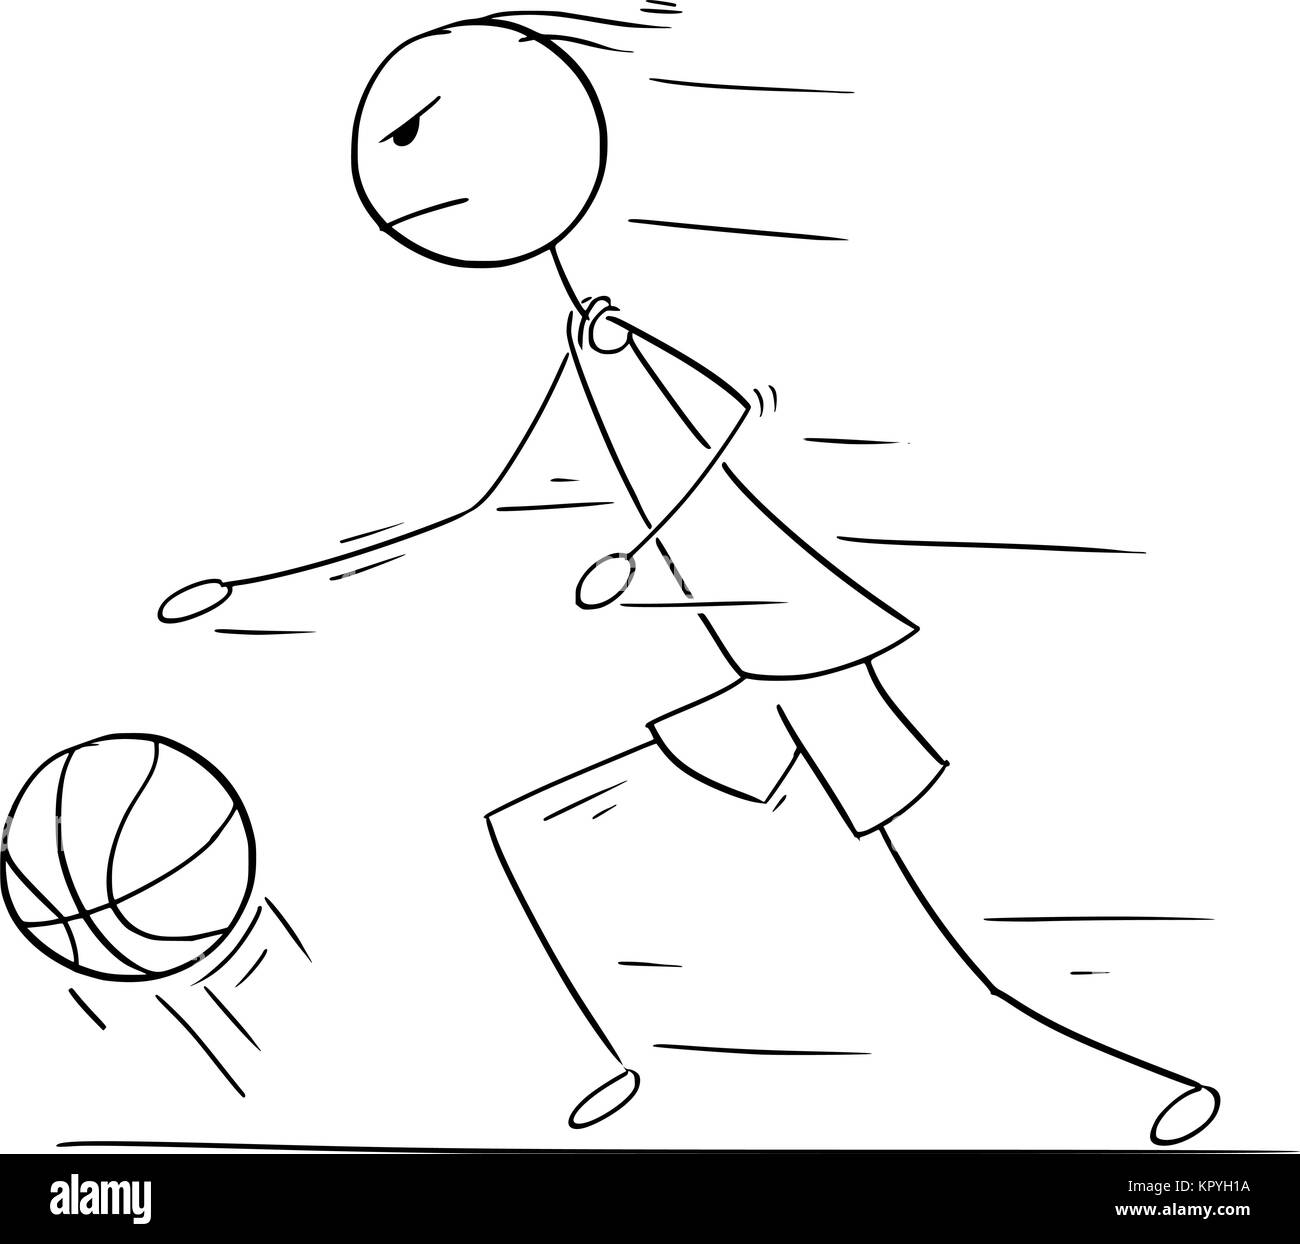 Cartoon stick man drawing illustration of basketball player running and dribbling with ball. Stock Vector